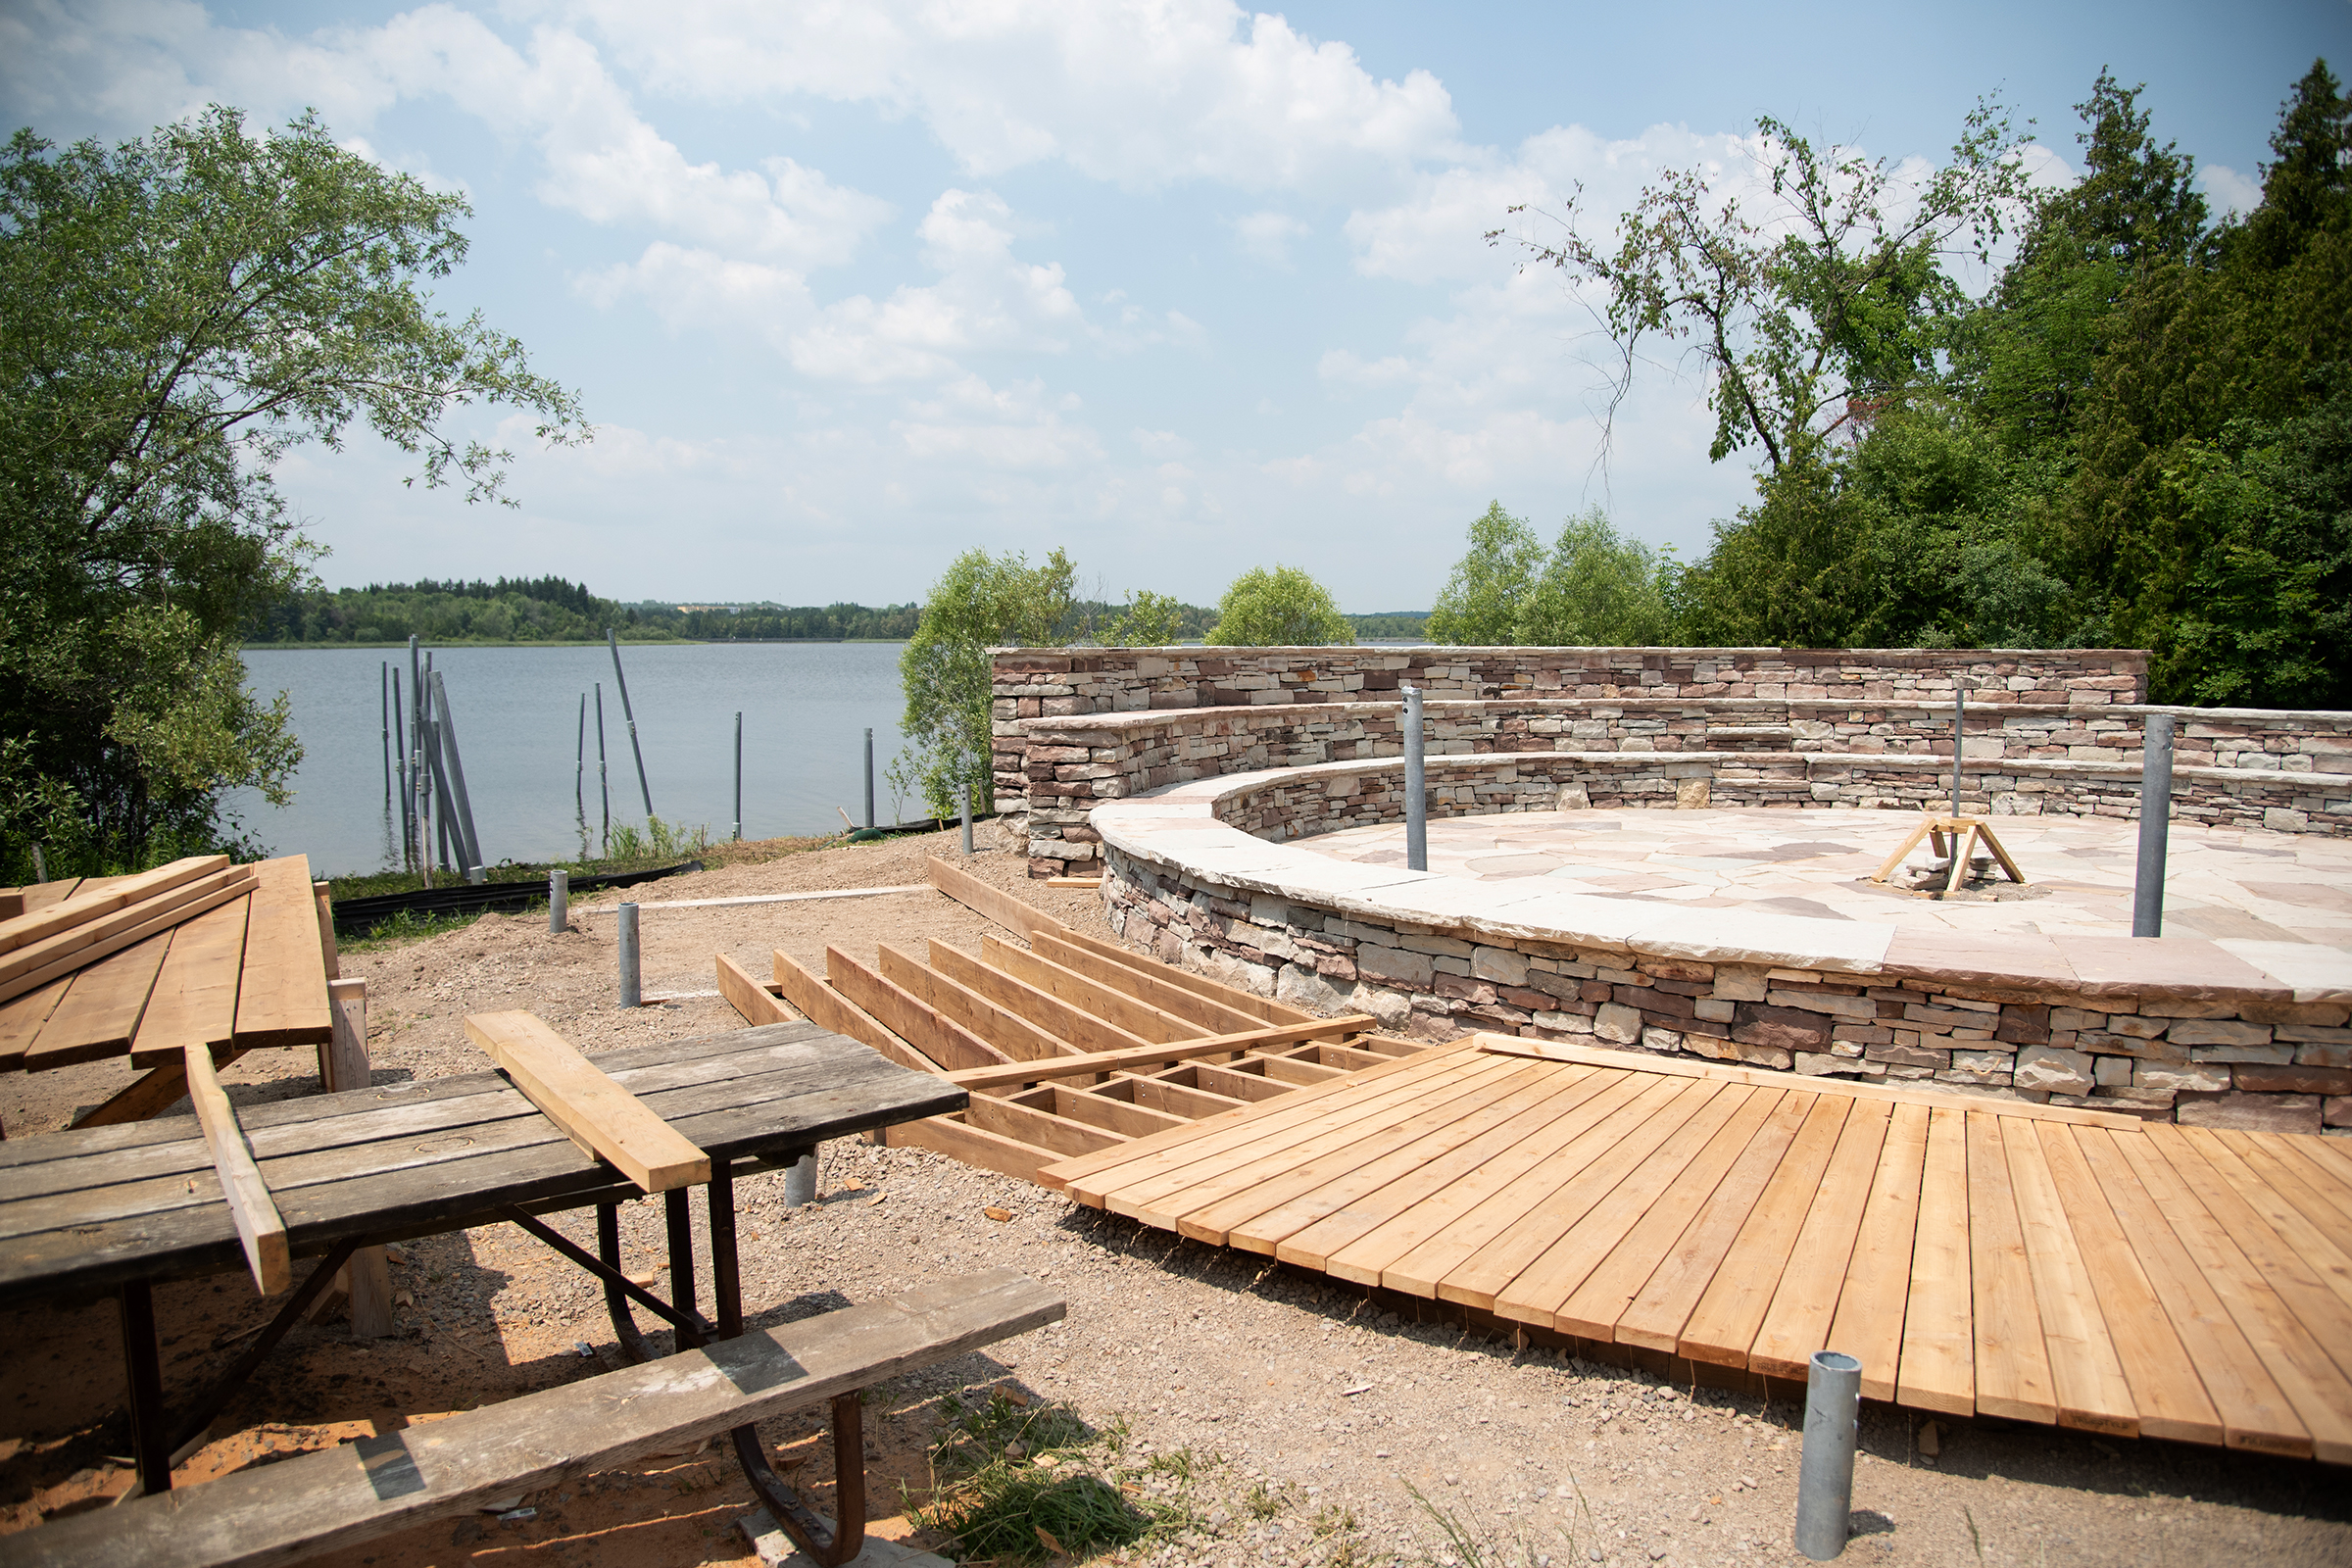 Construction of the Crane Gathering Space. Alt text: A round amphitheatre made of stone with surrounded by a wooden boardwalk under construction with a lake in the background